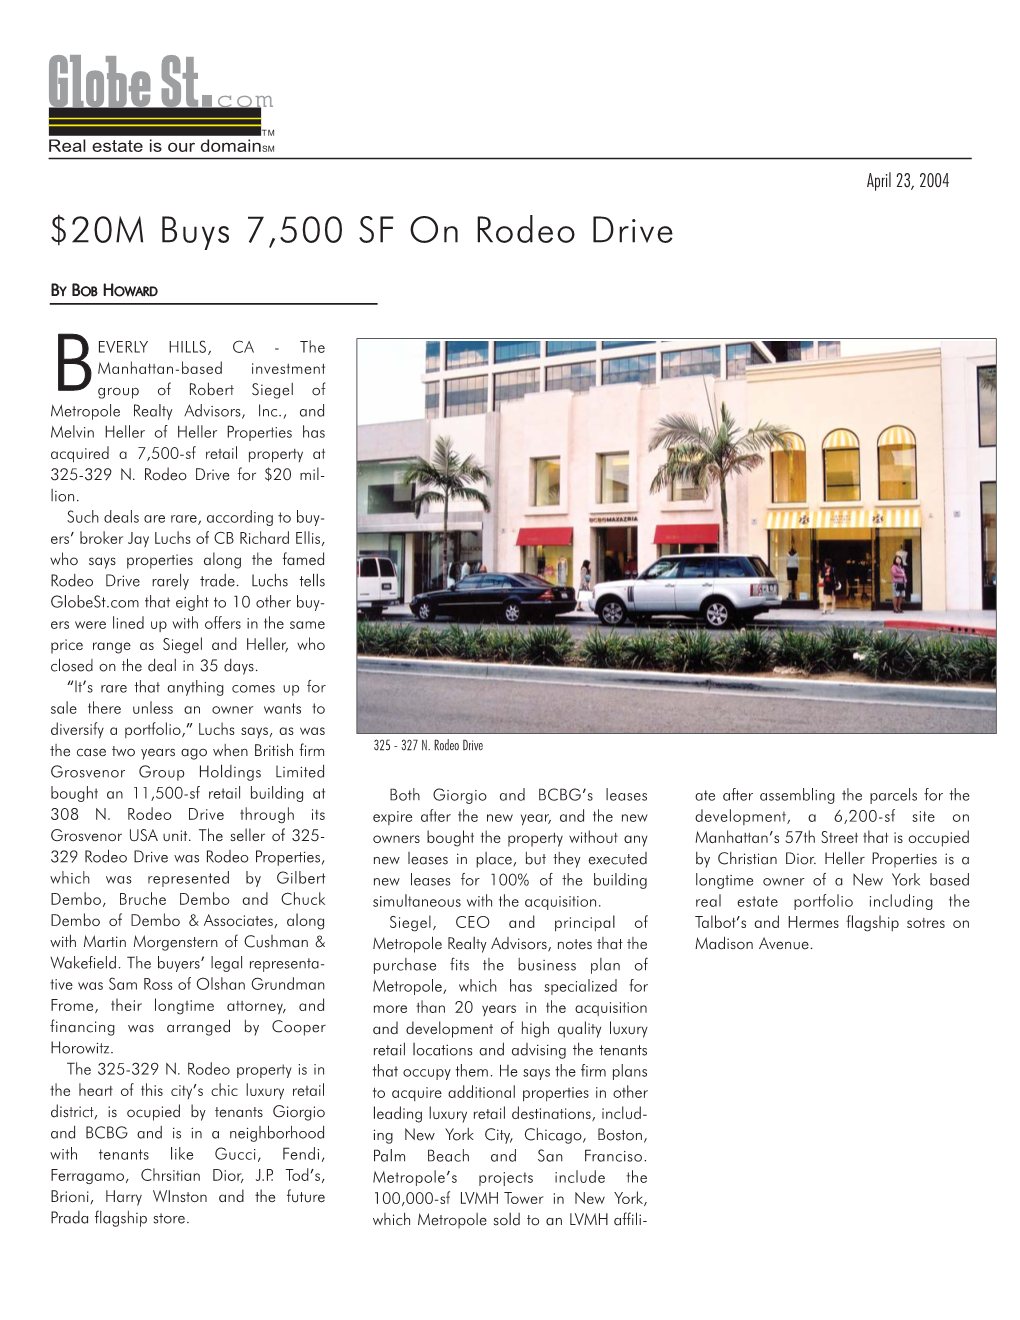 20M Buys 7500 SF on Rodeo Drive